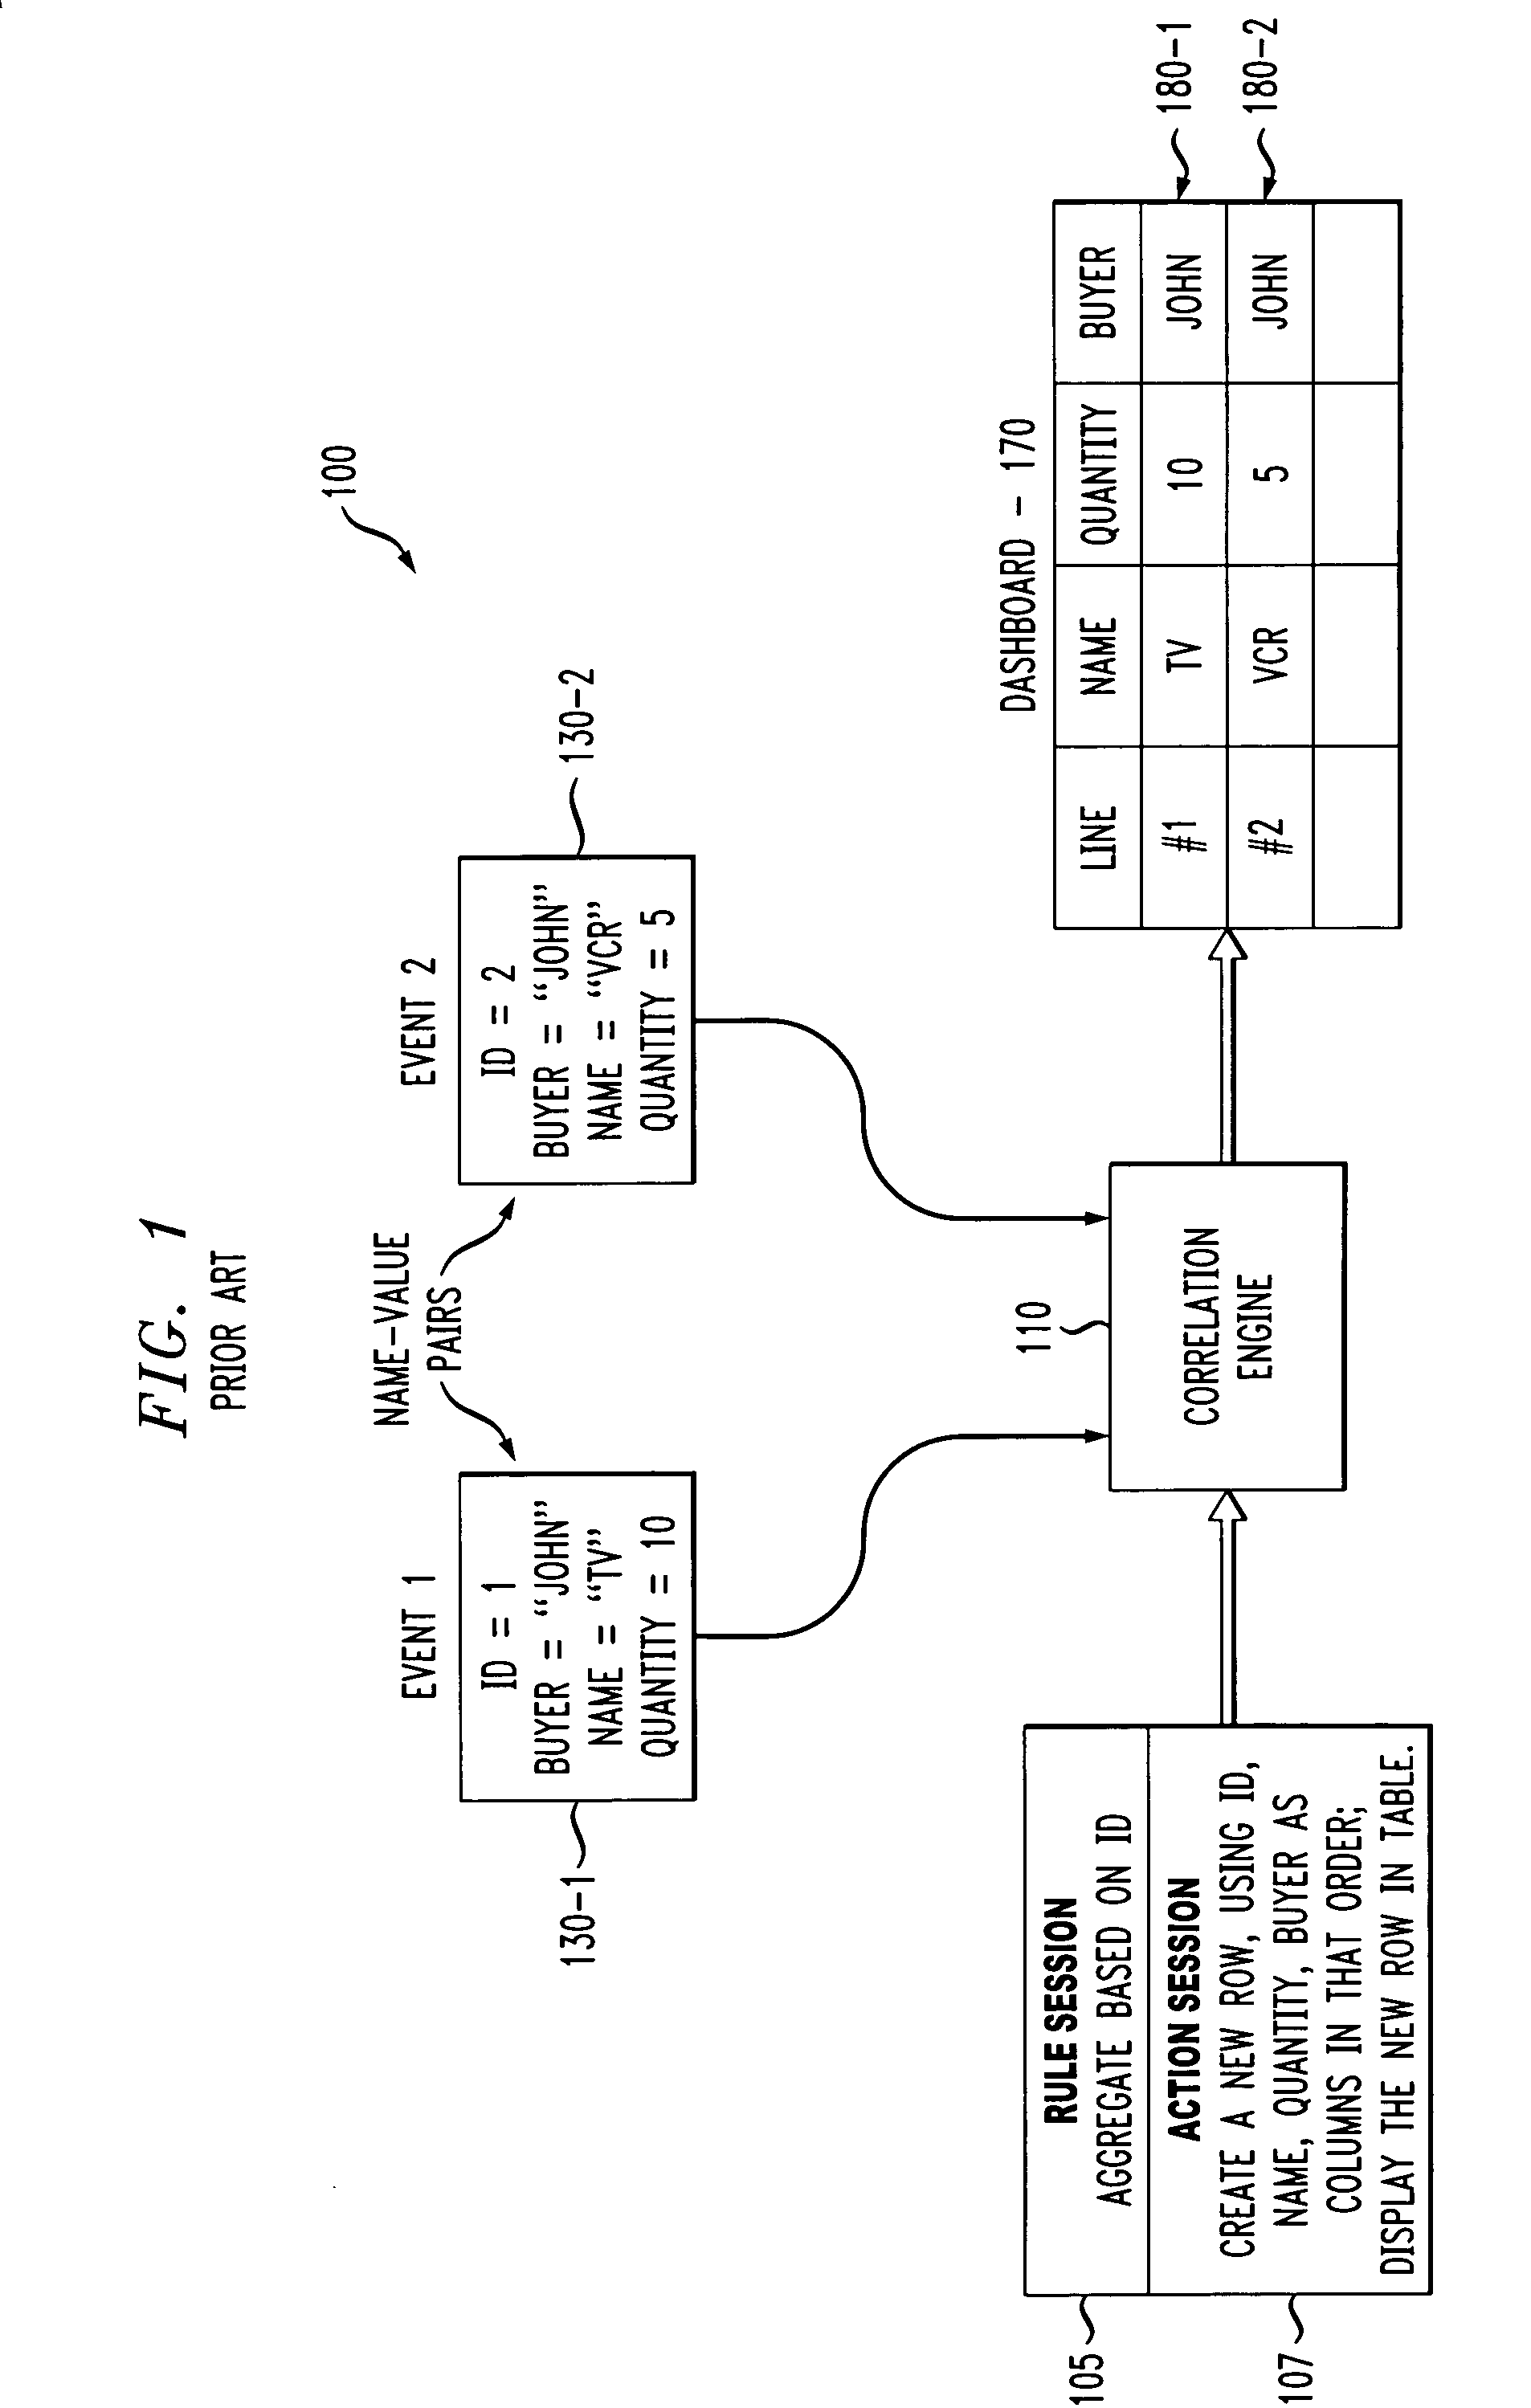 Method and apparatus for event transformation and adaptive correlation for monitoring business solutions